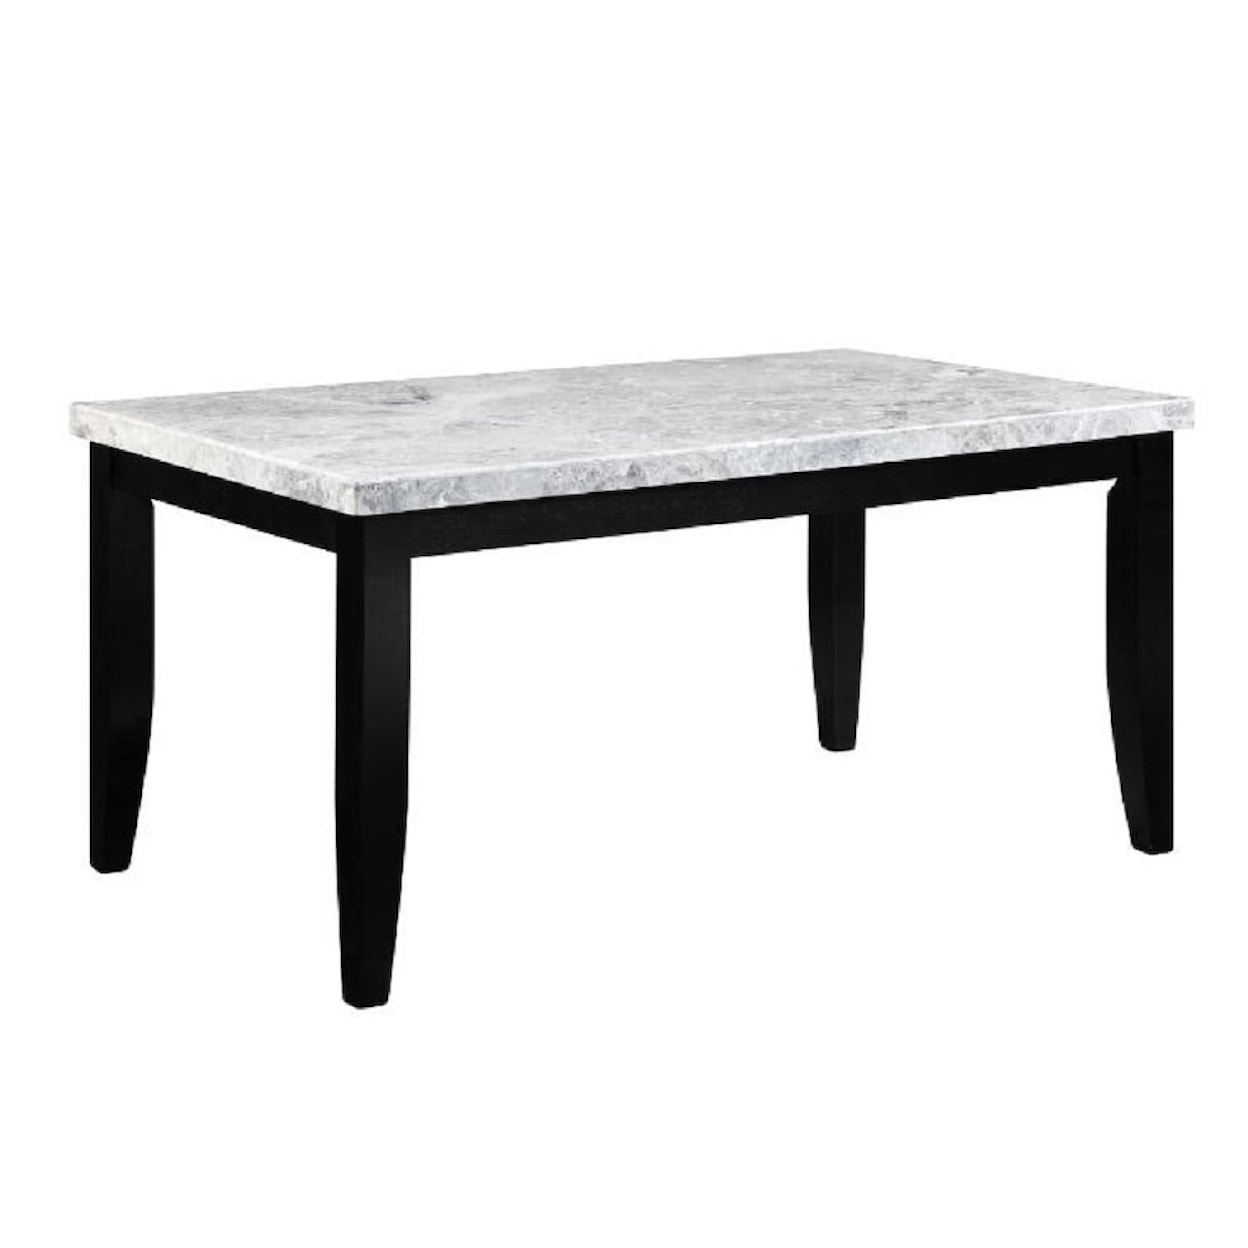 Acme Furniture Hussein Dining Table W/Marble Top